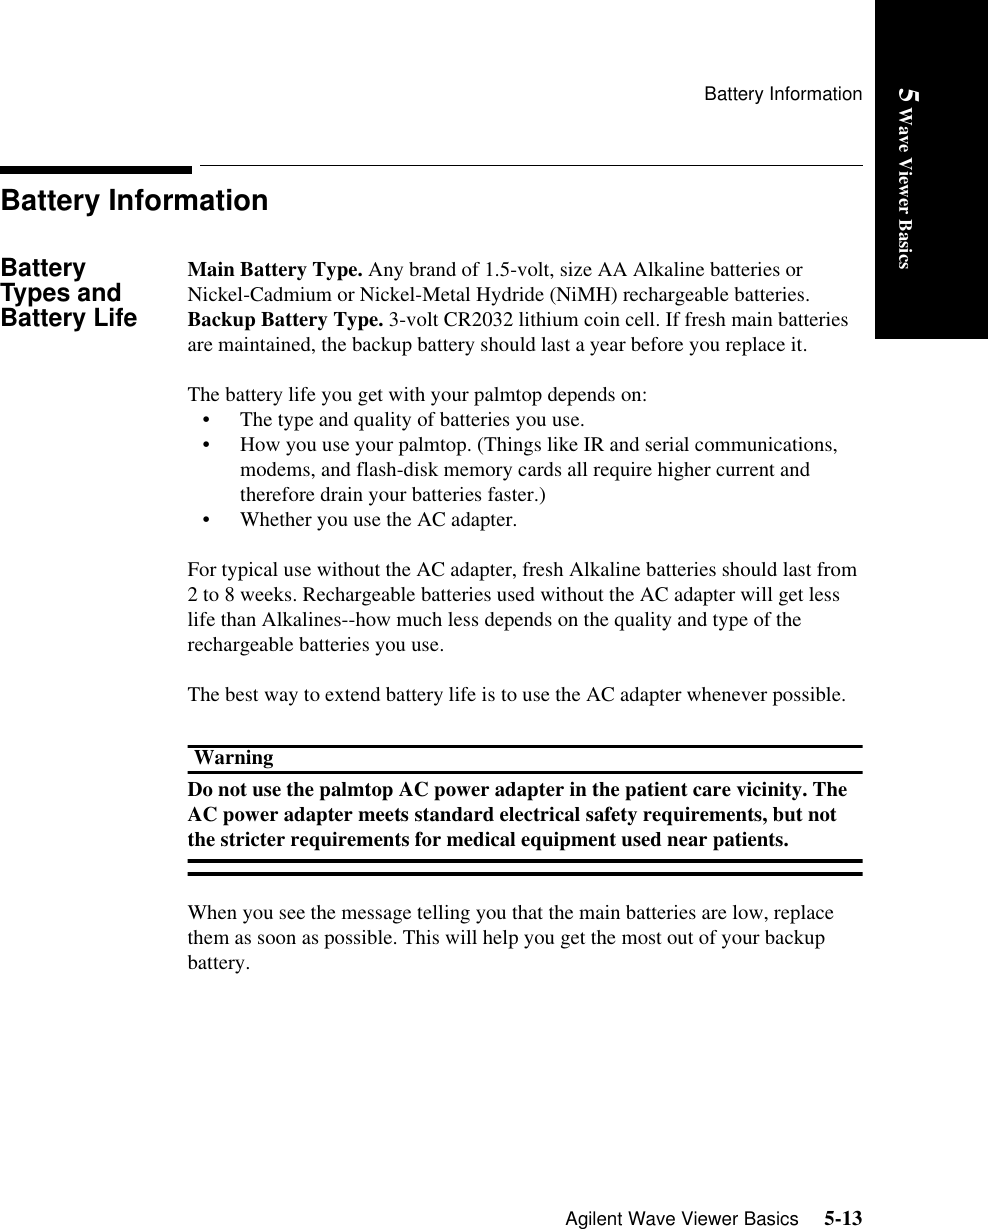 Battery InformationAgilent Wave Viewer Basics     5-135 Wave Viewer BasicsBattery InformationBattery Types and Battery LifeMain Battery Type. Any brand of 1.5-volt, size AA Alkaline batteries or Nickel-Cadmium or Nickel-Metal Hydride (NiMH) rechargeable batteries.Backup Battery Type. 3-volt CR2032 lithium coin cell. If fresh main batteries are maintained, the backup battery should last a year before you replace it.The battery life you get with your palmtop depends on:• The type and quality of batteries you use.• How you use your palmtop. (Things like IR and serial communications, modems, and flash-disk memory cards all require higher current and therefore drain your batteries faster.)• Whether you use the AC adapter.For typical use without the AC adapter, fresh Alkaline batteries should last from 2 to 8 weeks. Rechargeable batteries used without the AC adapter will get less life than Alkalines--how much less depends on the quality and type of the rechargeable batteries you use.The best way to extend battery life is to use the AC adapter whenever possible.WarningDo not use the palmtop AC power adapter in the patient care vicinity. The AC power adapter meets standard electrical safety requirements, but not the stricter requirements for medical equipment used near patients.When you see the message telling you that the main batteries are low, replace them as soon as possible. This will help you get the most out of your backup battery.